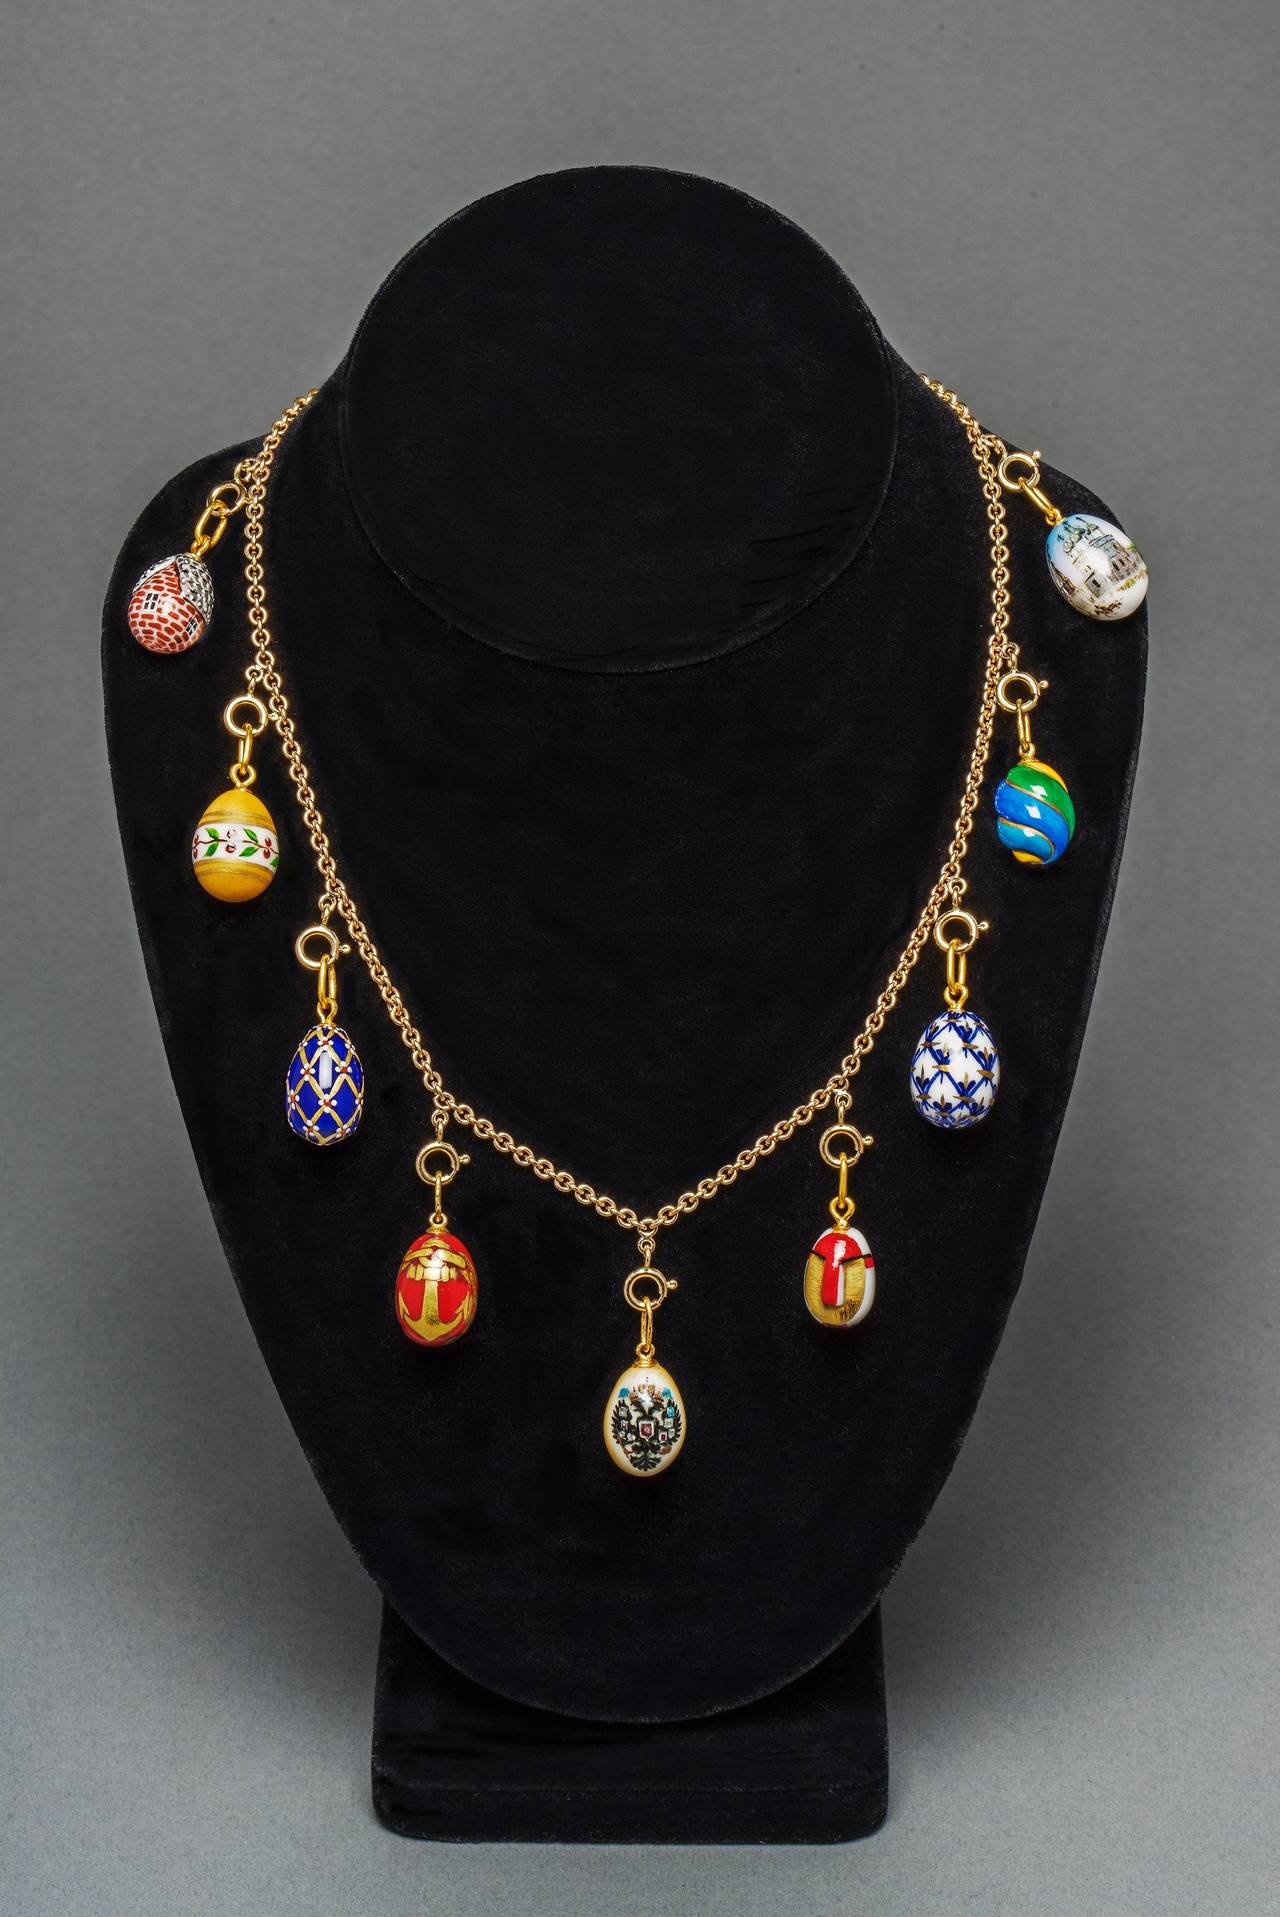 This beautiful Easter egg necklace is designed as a classic 14k yellow gold link chain suspending nine hand painted egg pendants from St. Petersburg, Russia. In colorful porcelain depicting a Romanov double-headed eagle-symbol of Imperial Russia, a